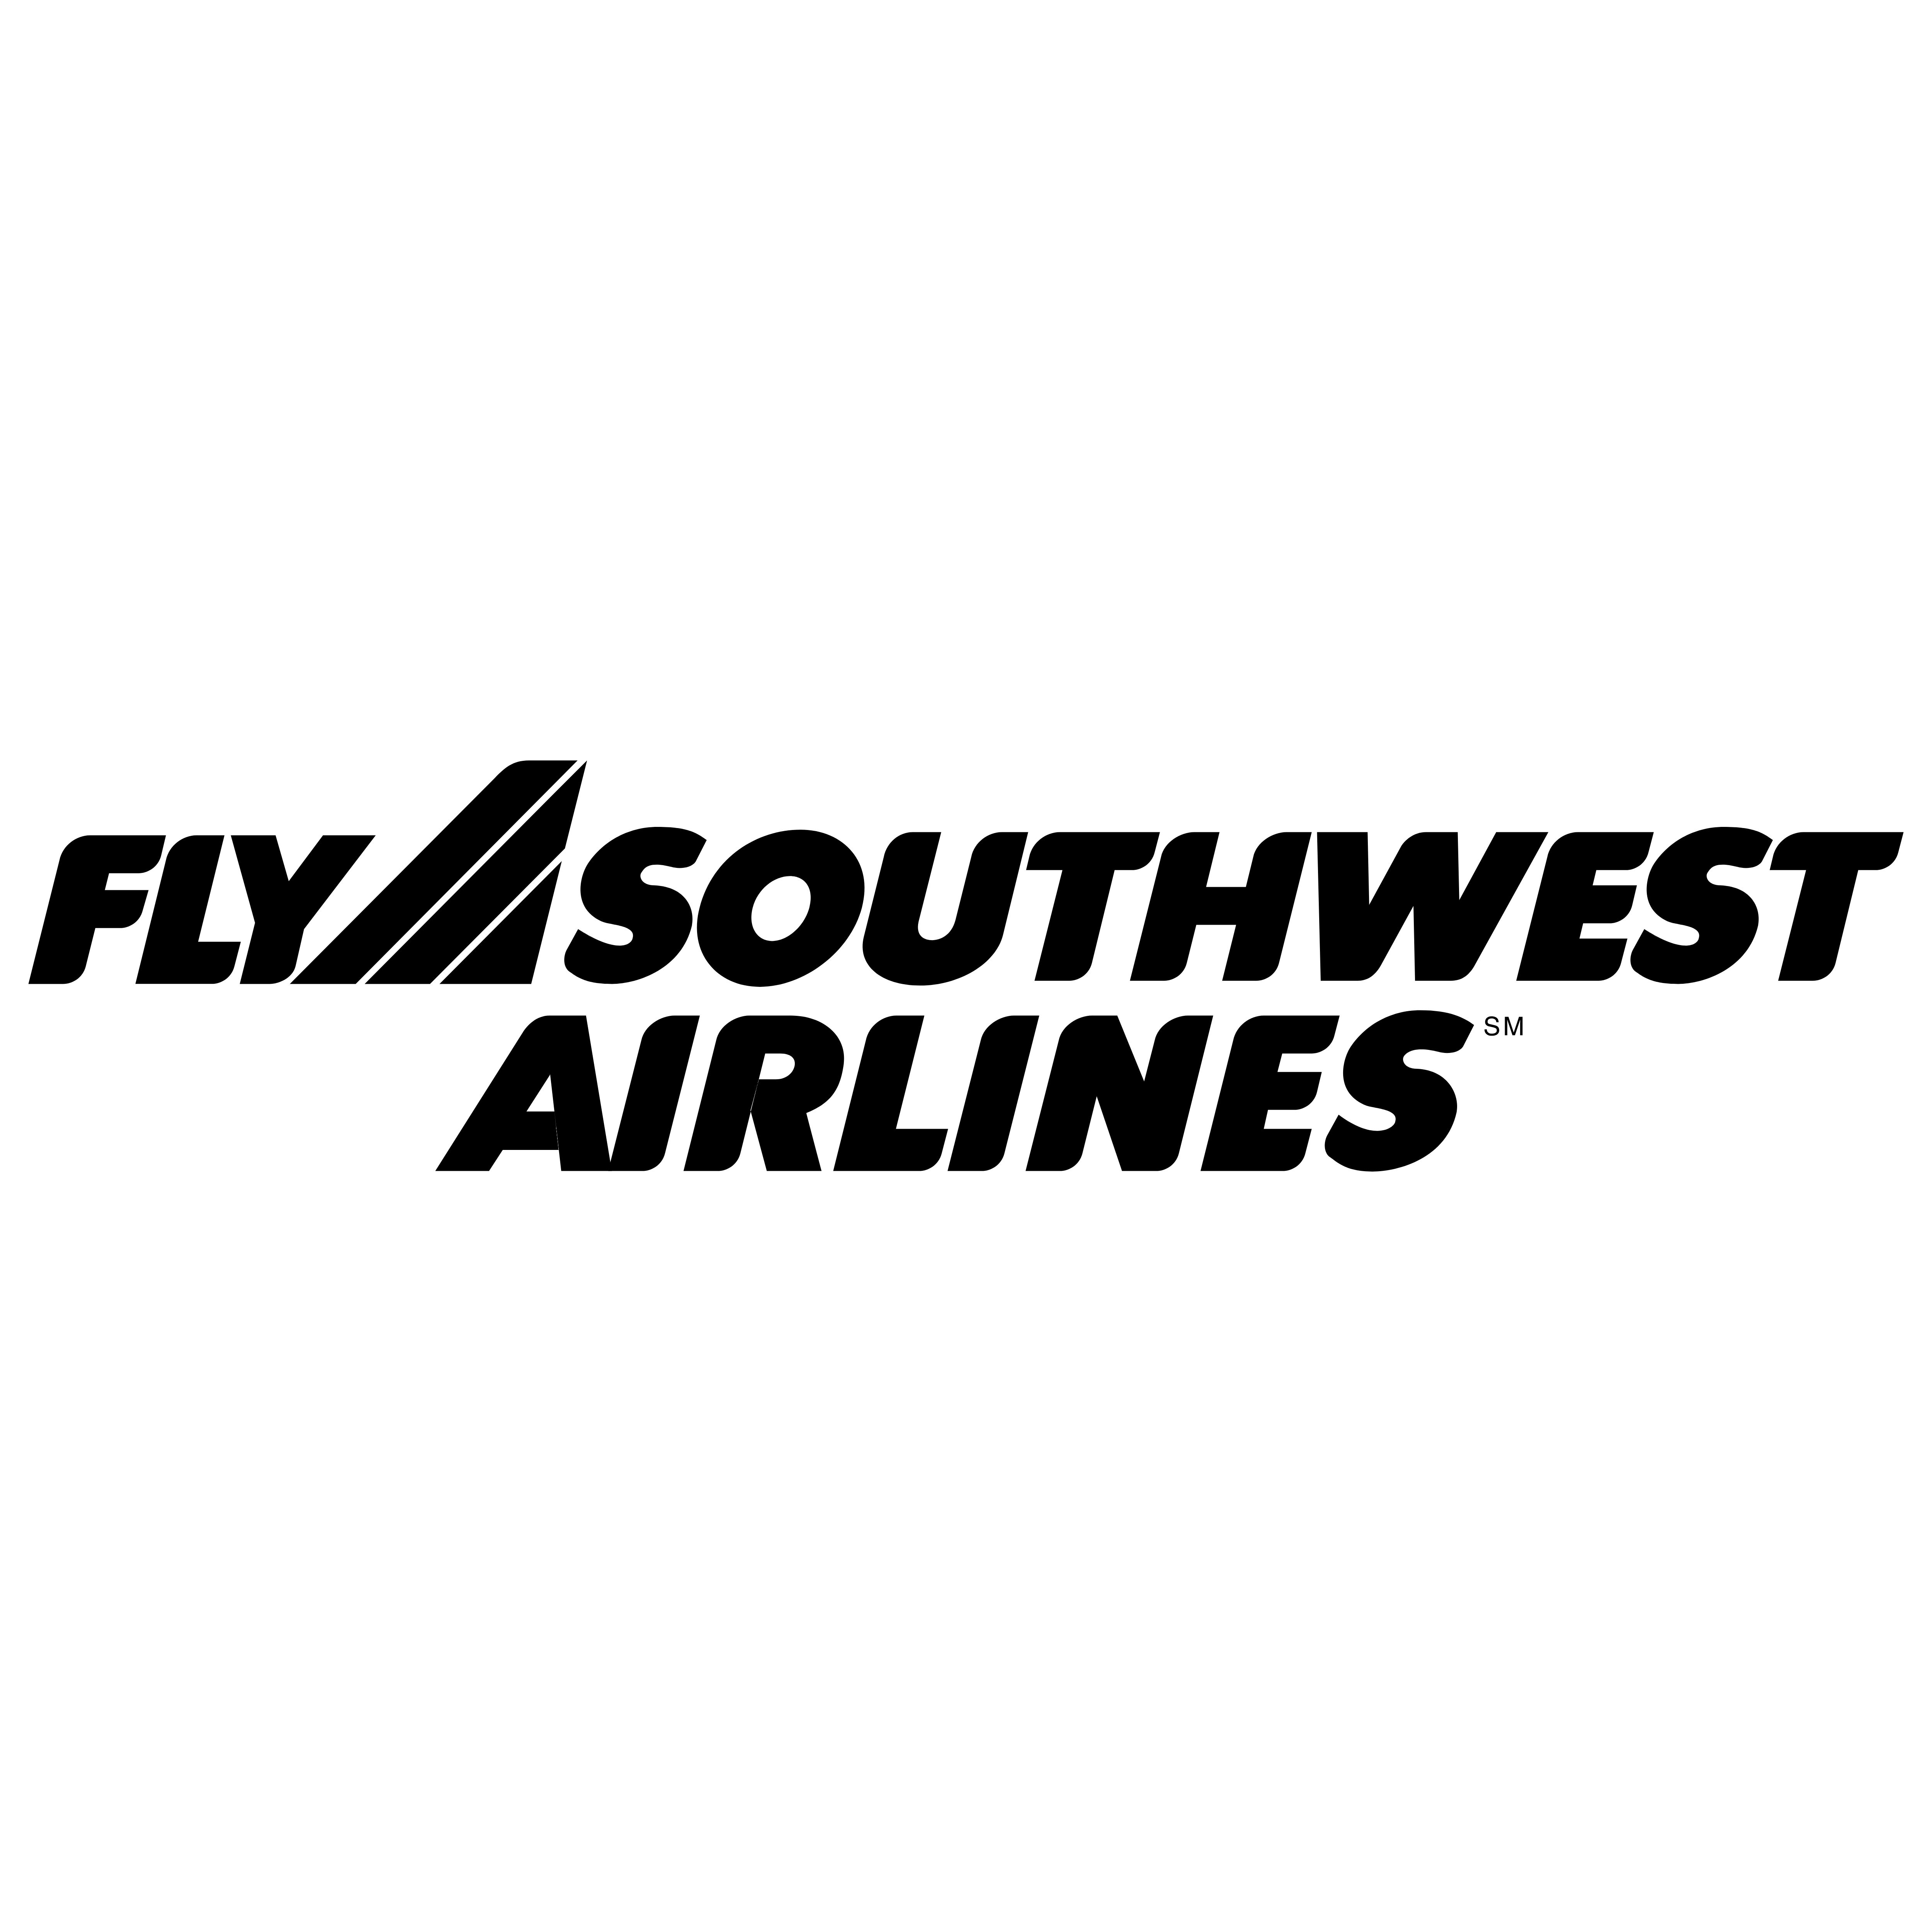 logo for southwest airlines